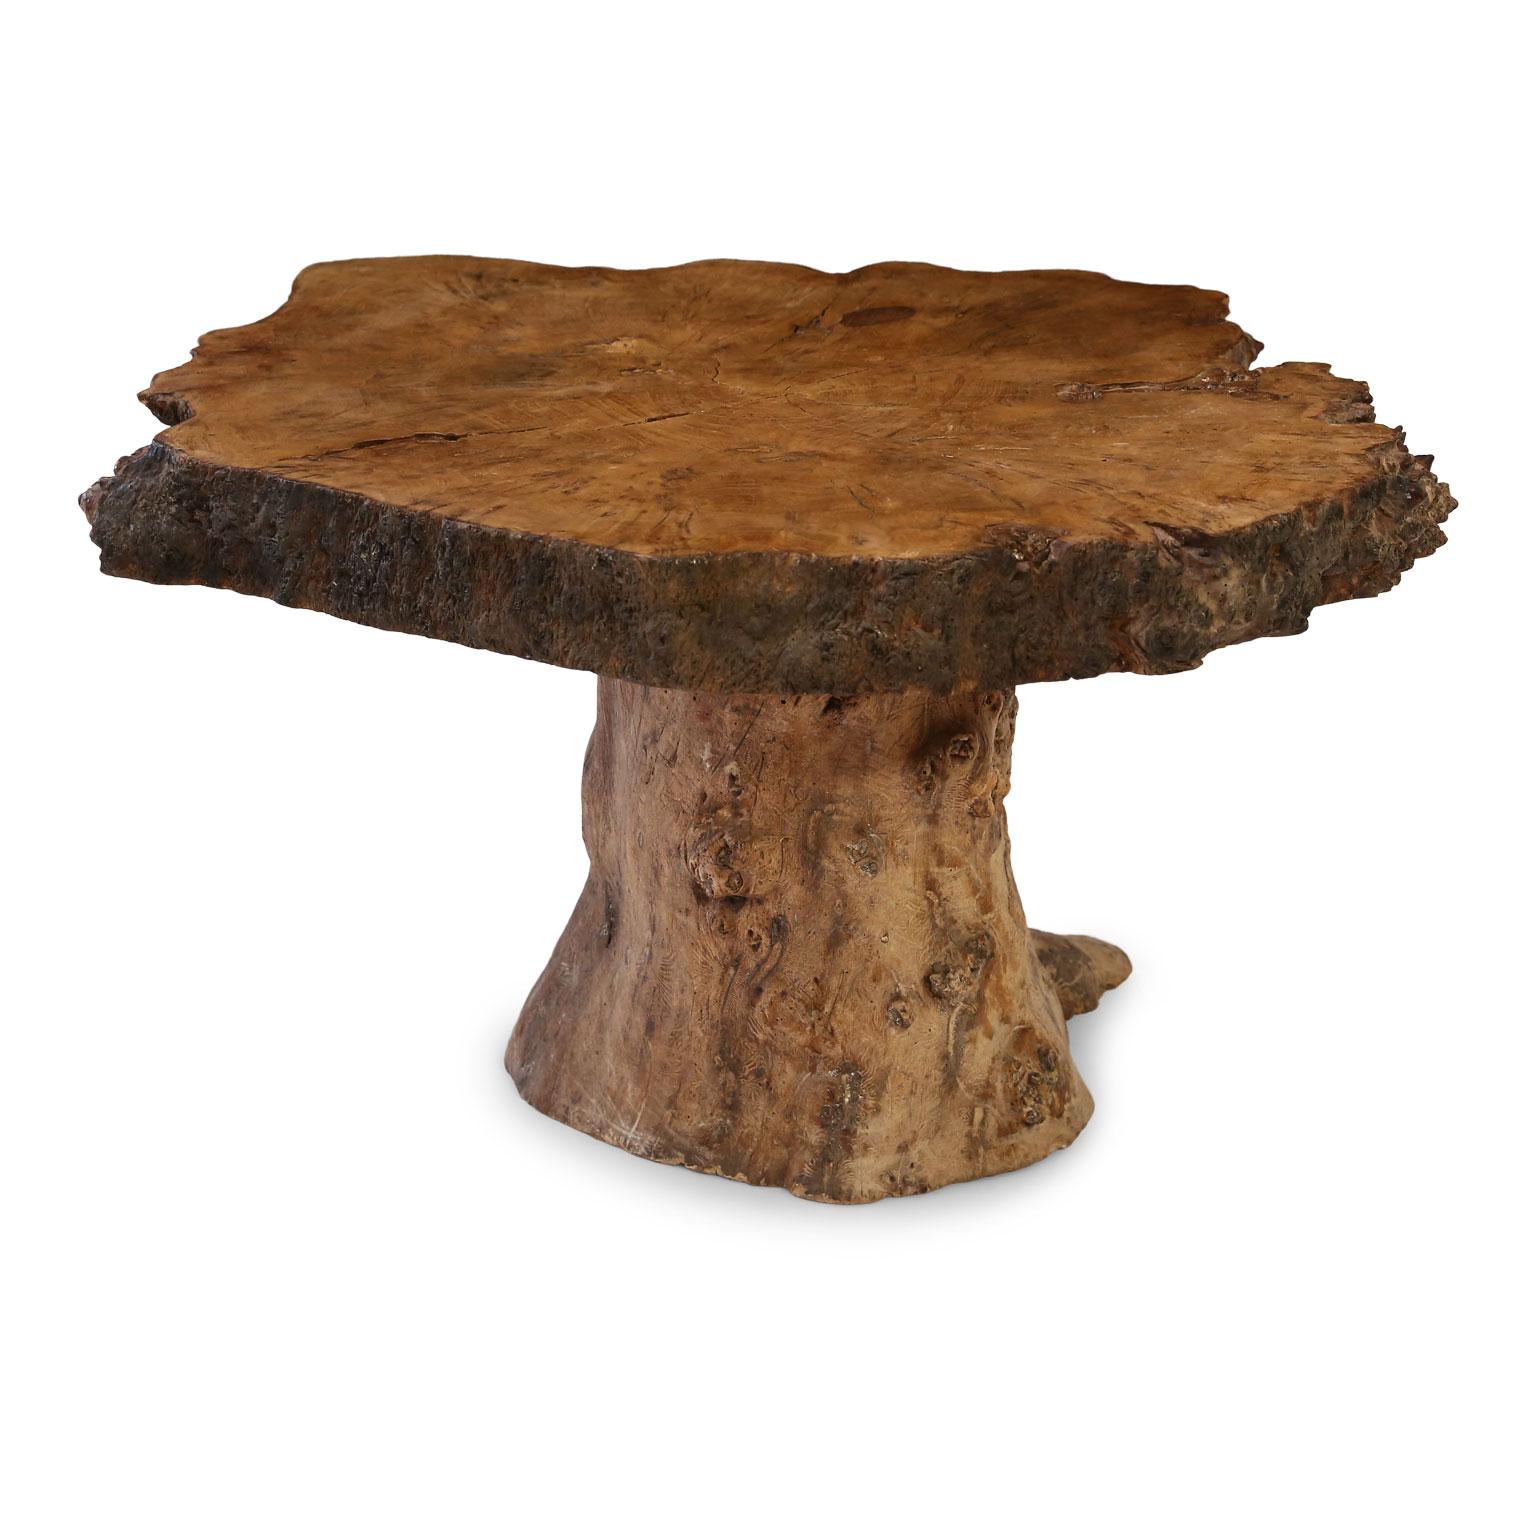 Vintage tree trunk coffee table from France. Trunk base supports larger tree trunk cross section top. Wonderful umber and brown colors.